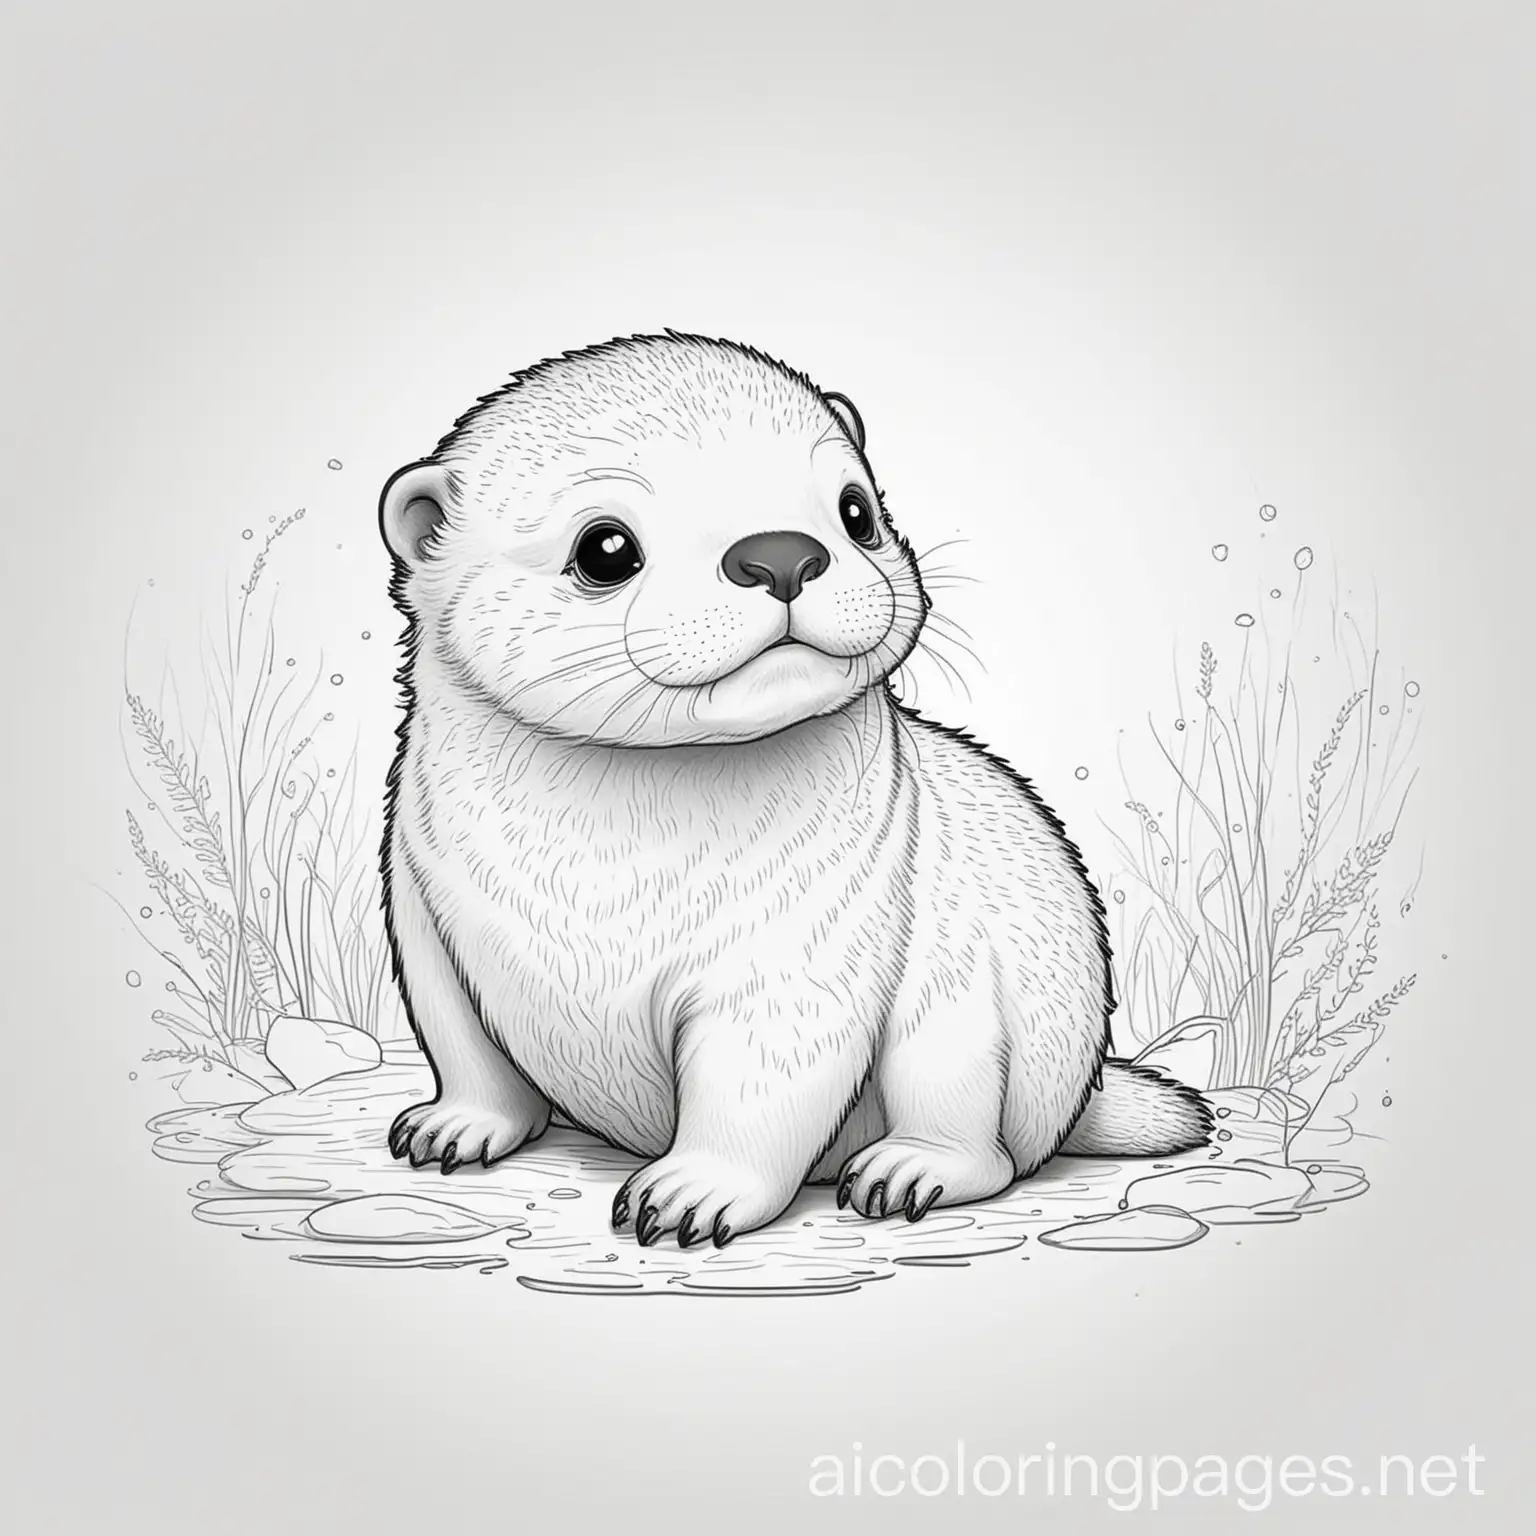 Ein süßes baby Otter zum ausmalen, Coloring Page, black and white, line art, white background, Simplicity, Ample White Space. The background of the coloring page is plain white to make it easy for young children to color within the lines. The outlines of all the subjects are easy to distinguish, making it simple for kids to color without too much difficulty